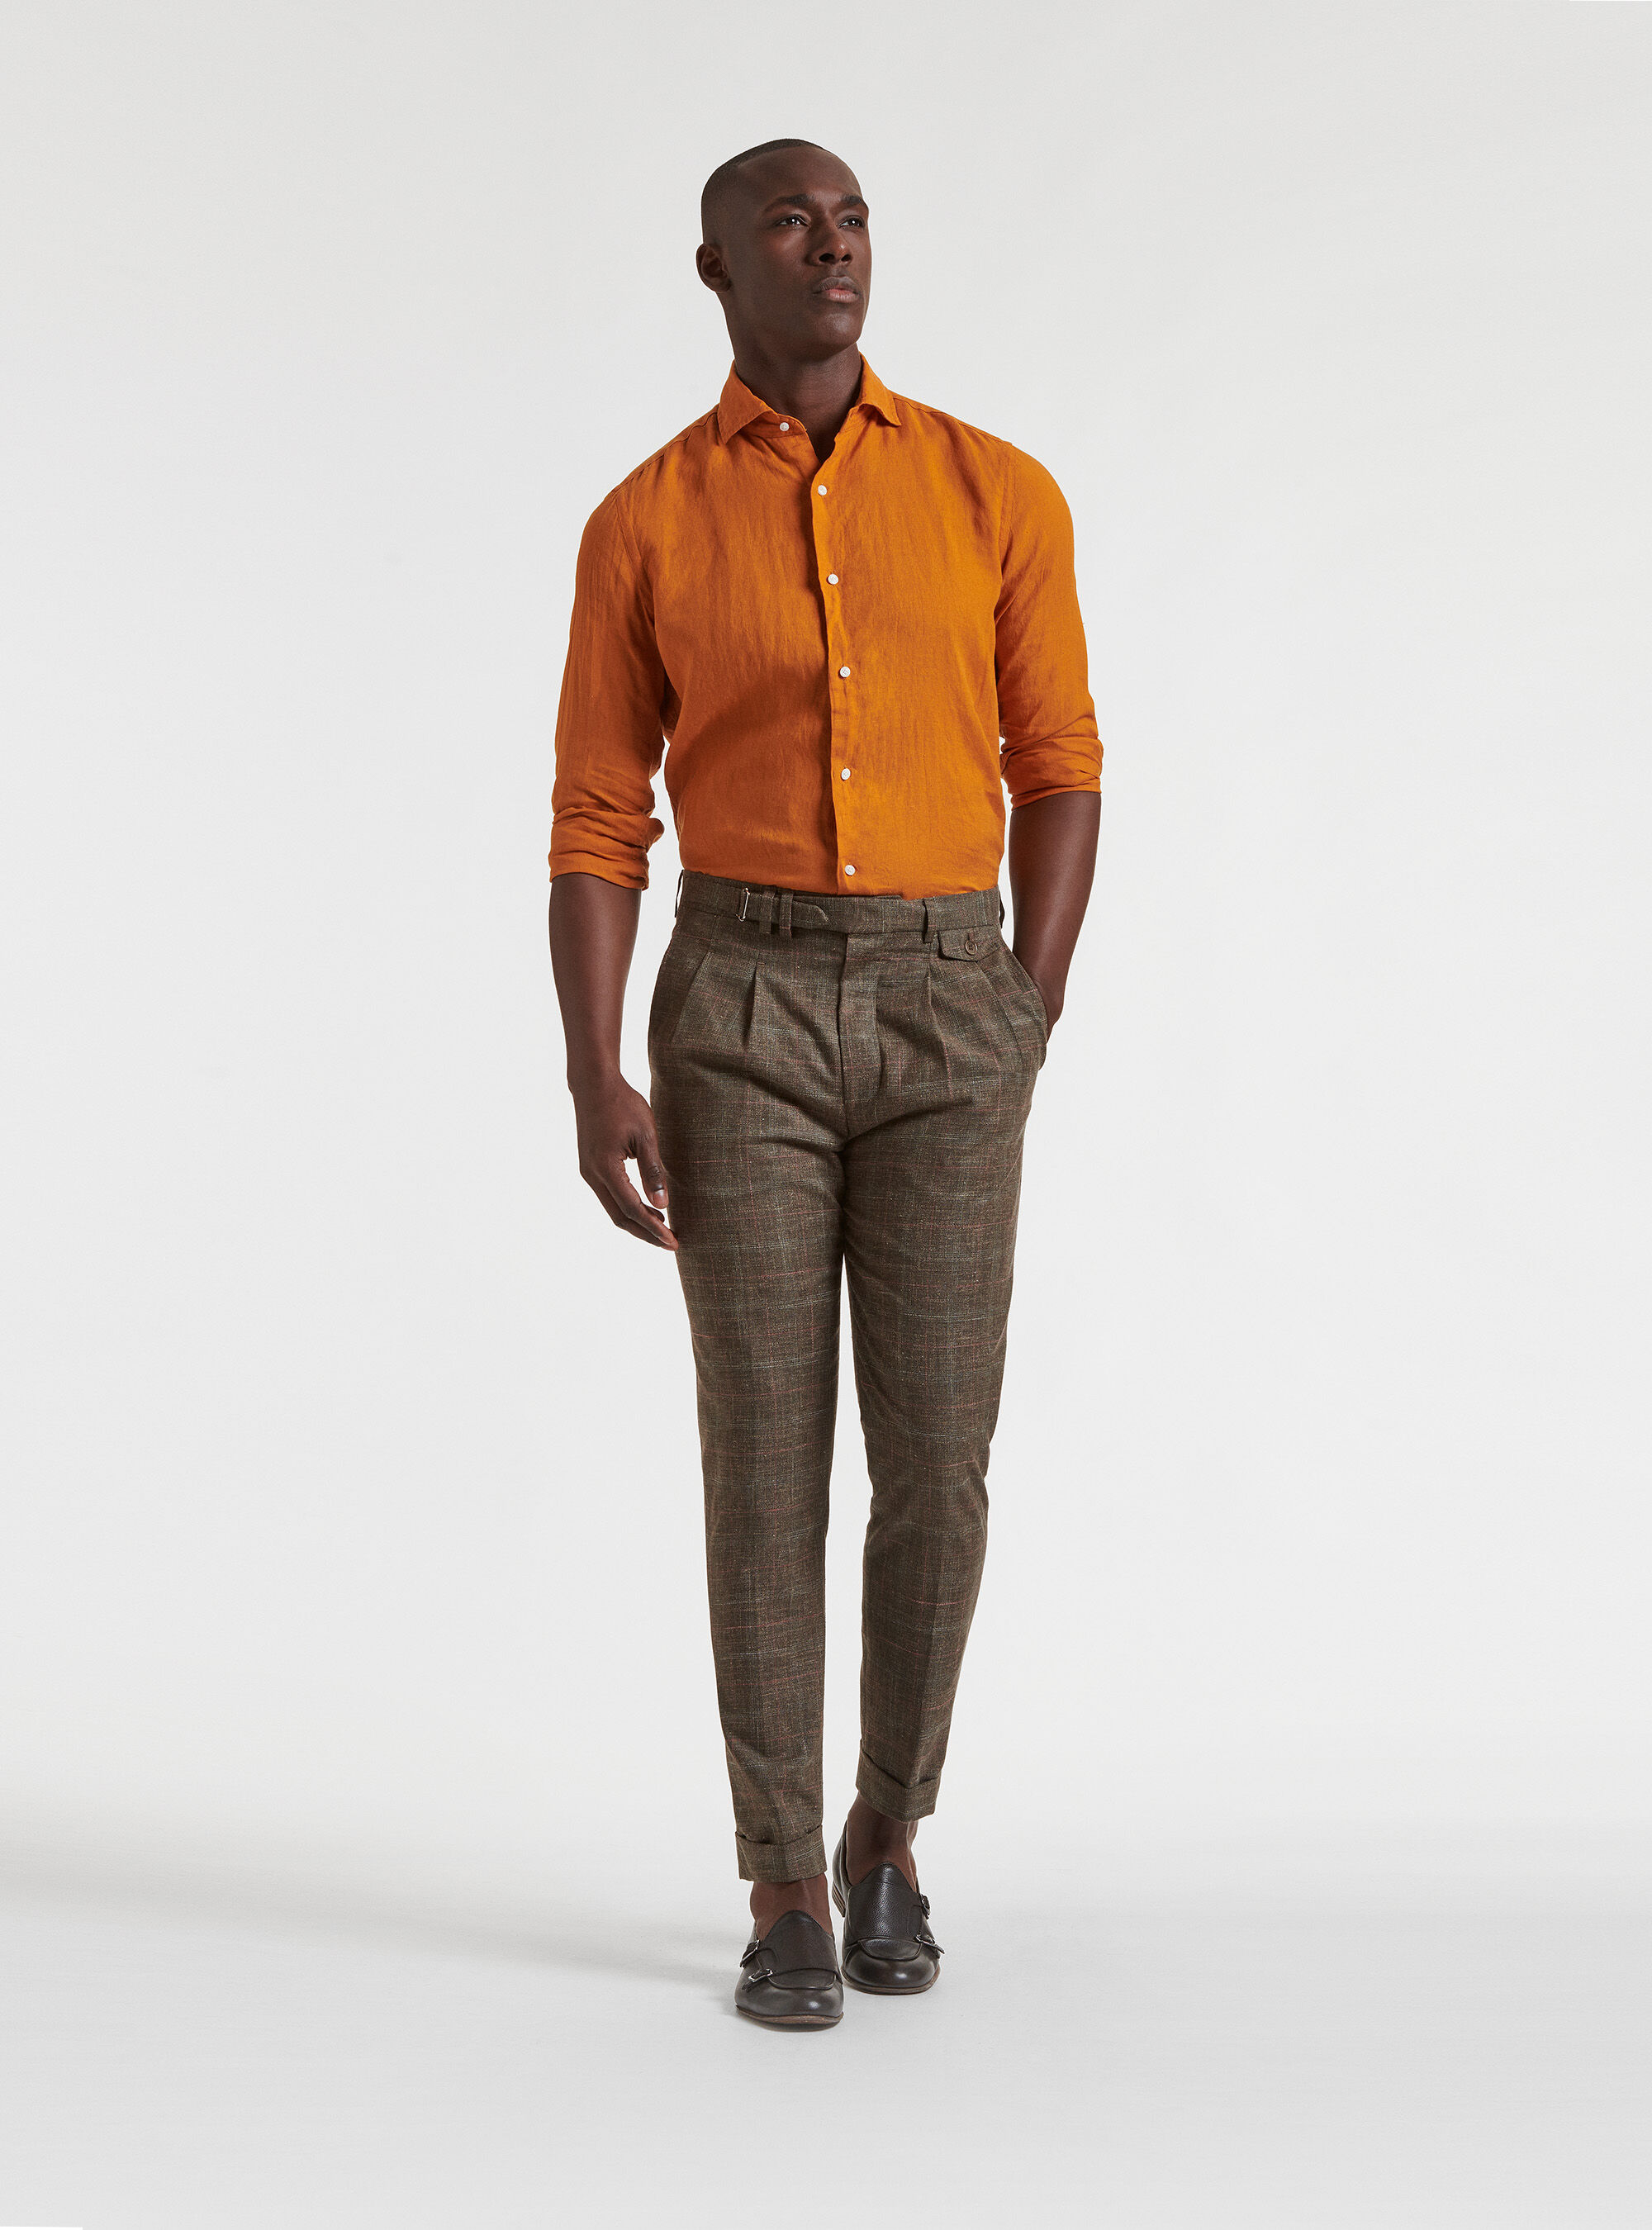 Brown Dress Pants with Orange Shirt Outfits For Men 12 ideas  outfits   Lookastic